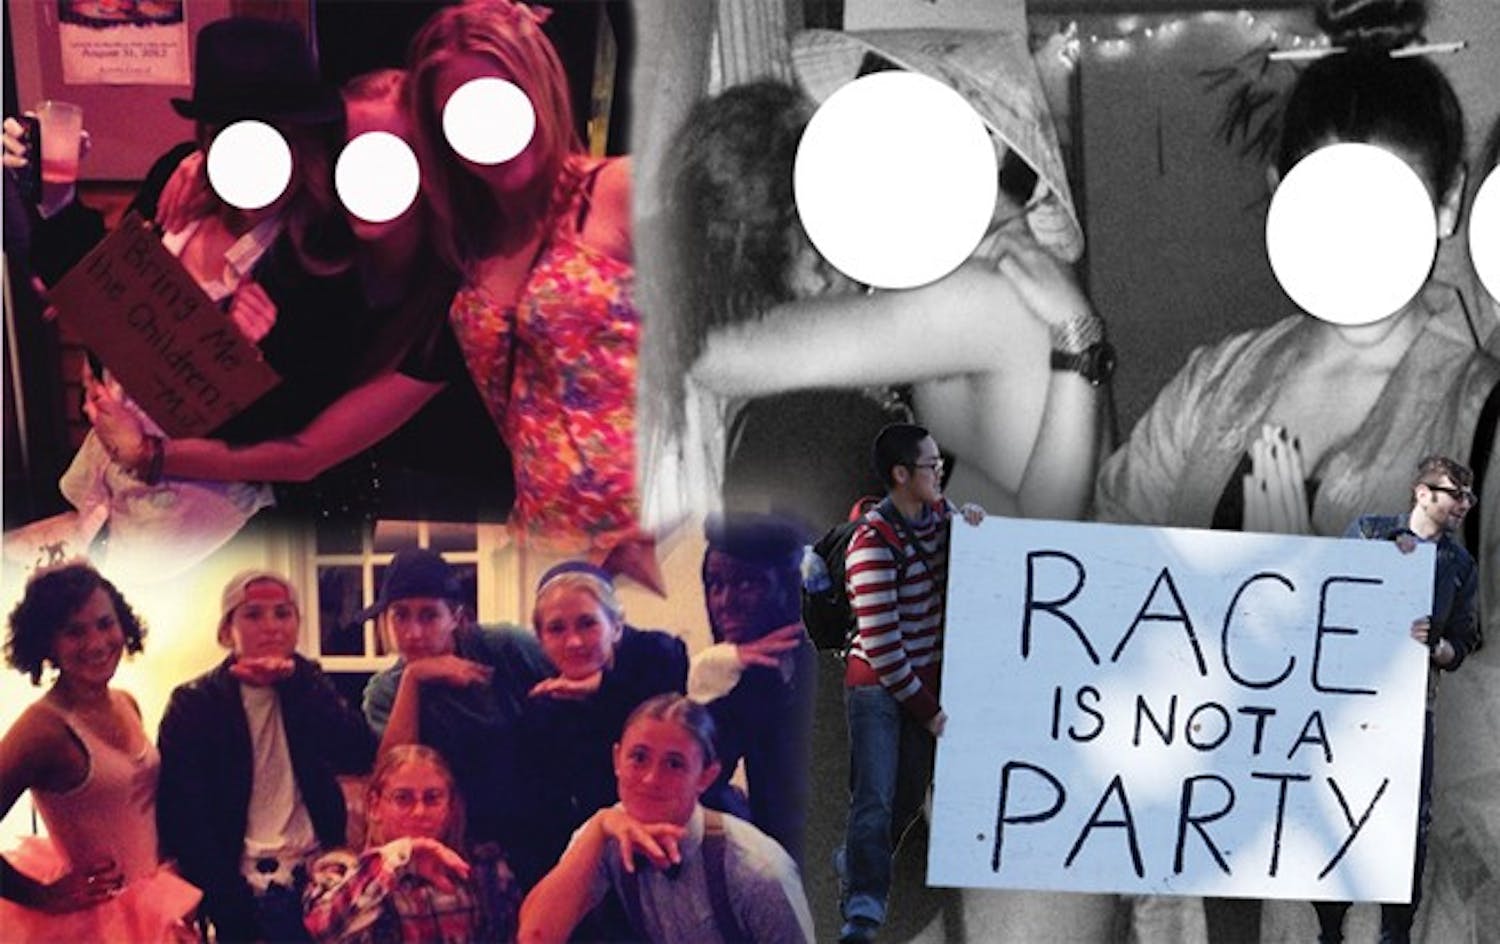 Clockwise from top left, students pose at a “Creepy Guys and Cutie Pies” party; “Asia Prime” party attendees dress in stereotypical costumes; activists hold a sign protesting the “Asia Prime” party; the women’s lacrosse team wears a costume involving blackface.